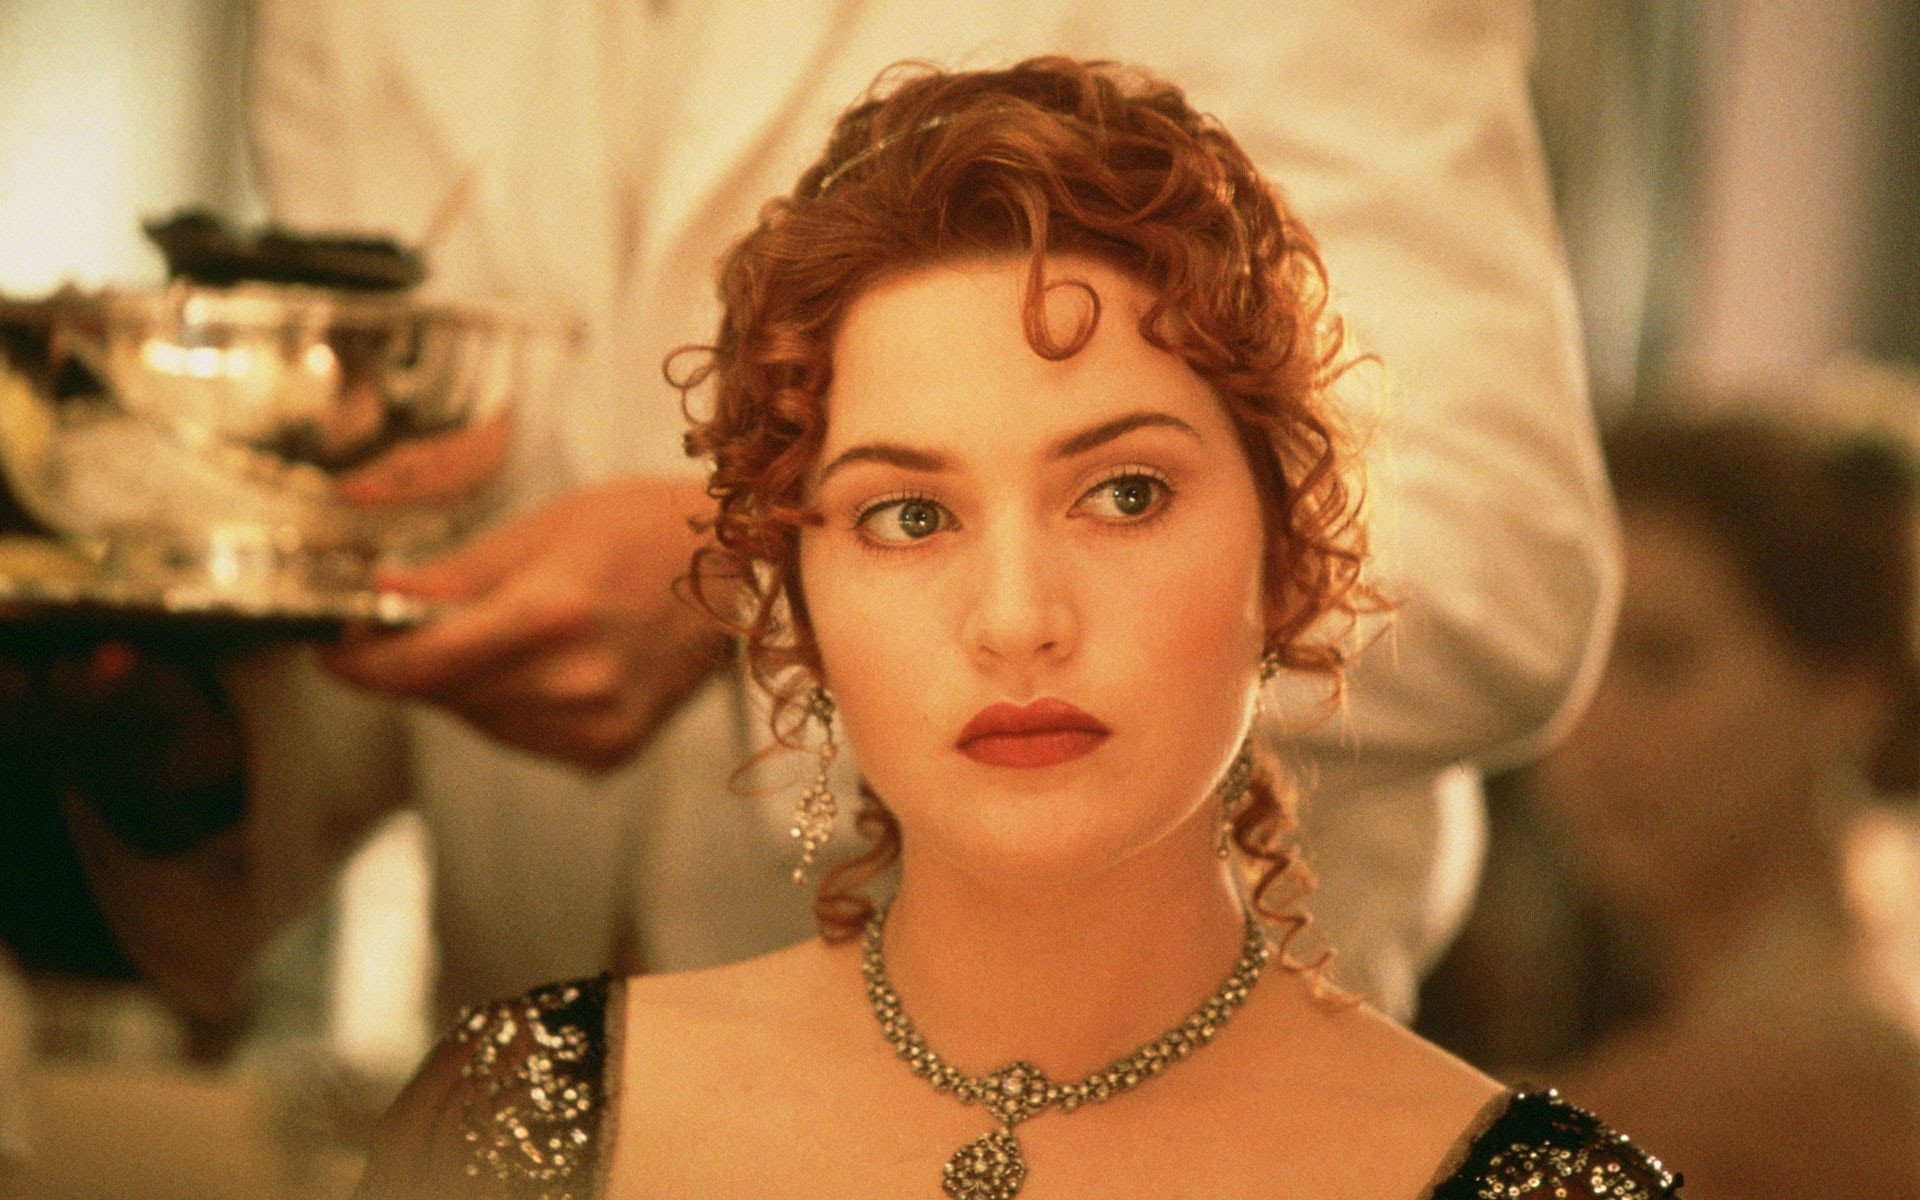 Wallpaper Rose From Titanic Movie, Kate Winslet.